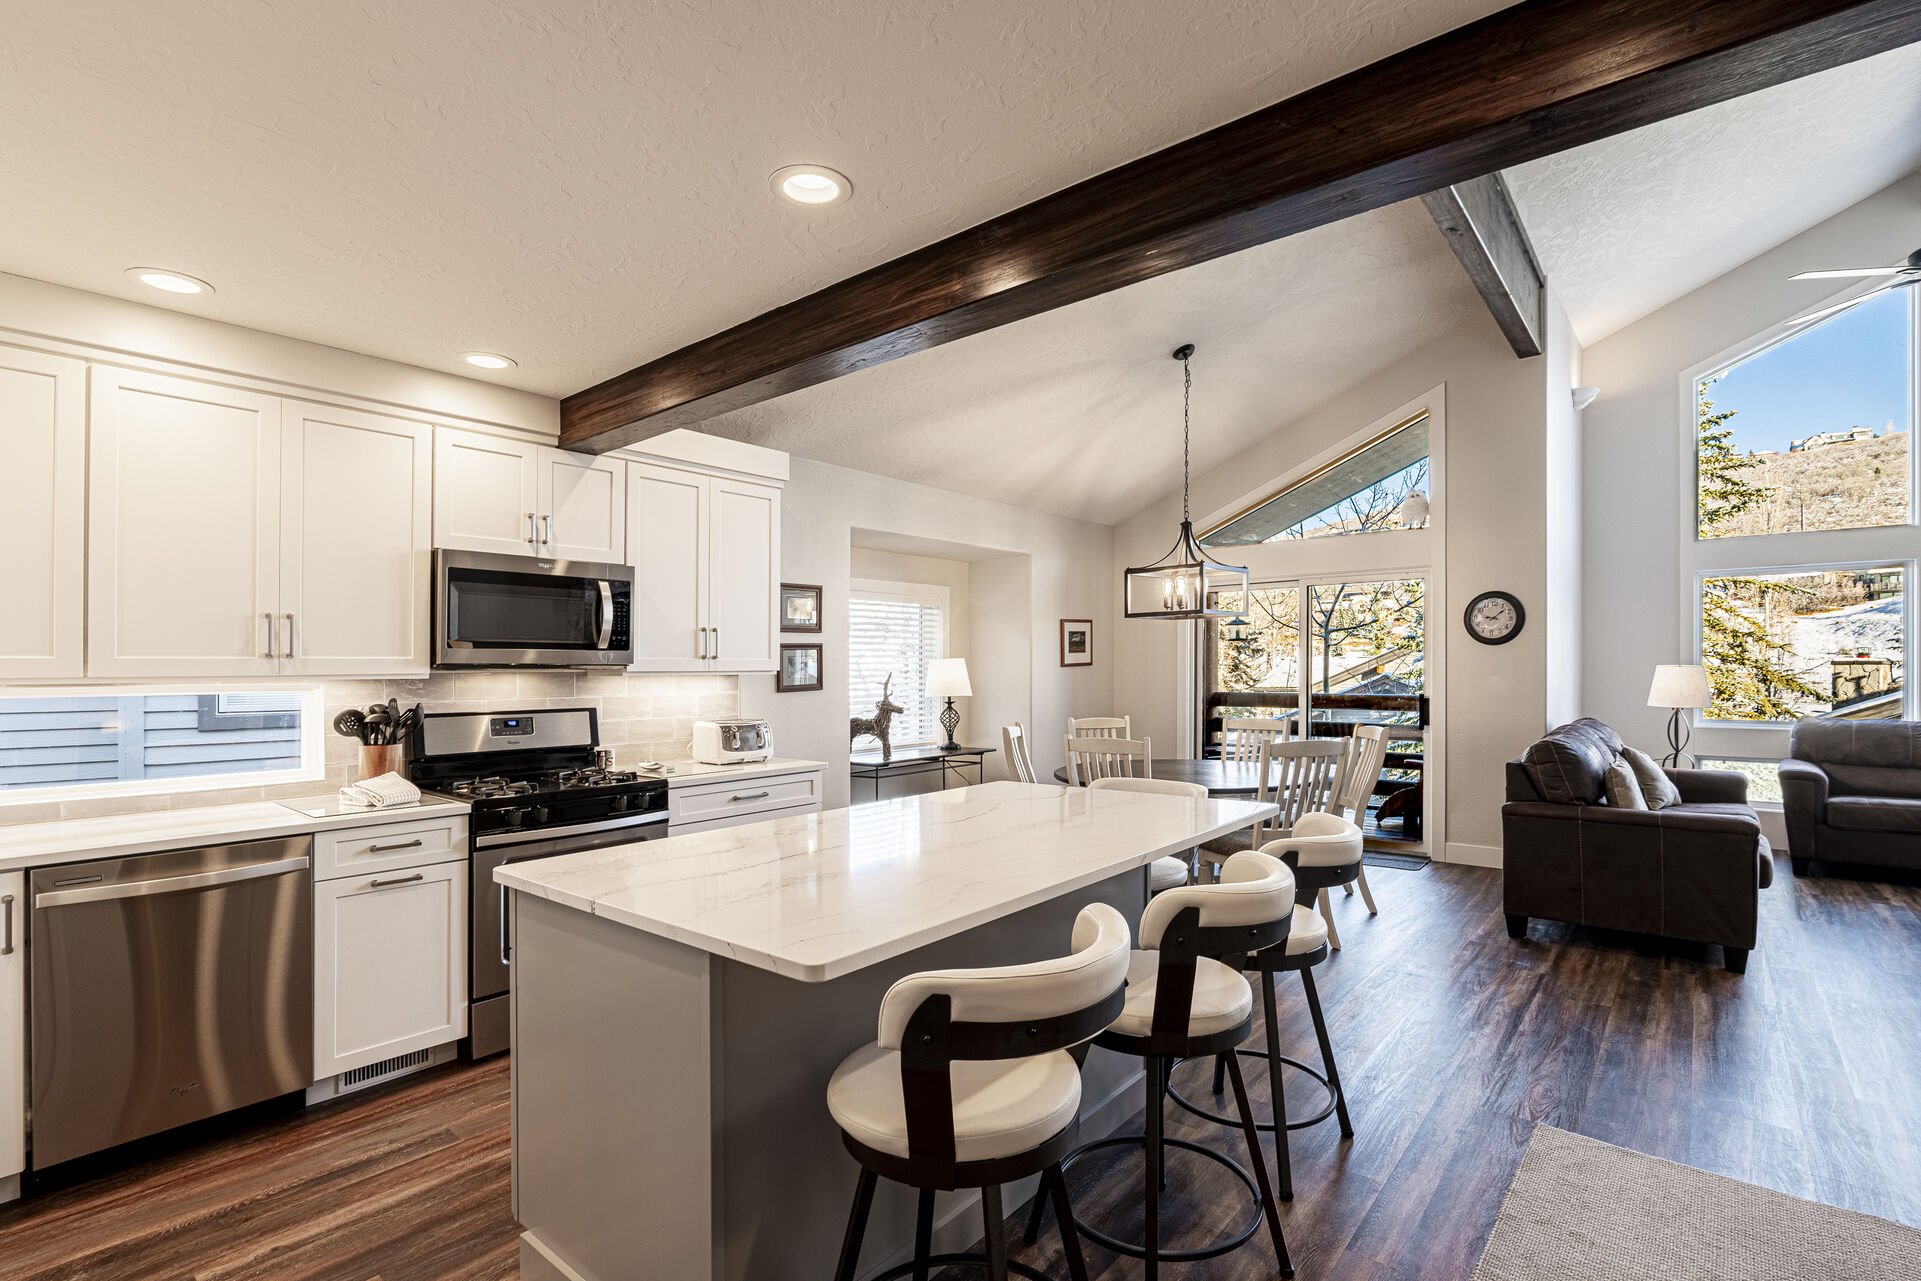 Fully Equipped Kitchen with Stainless Steel Appliances, and Bar Seating for Four